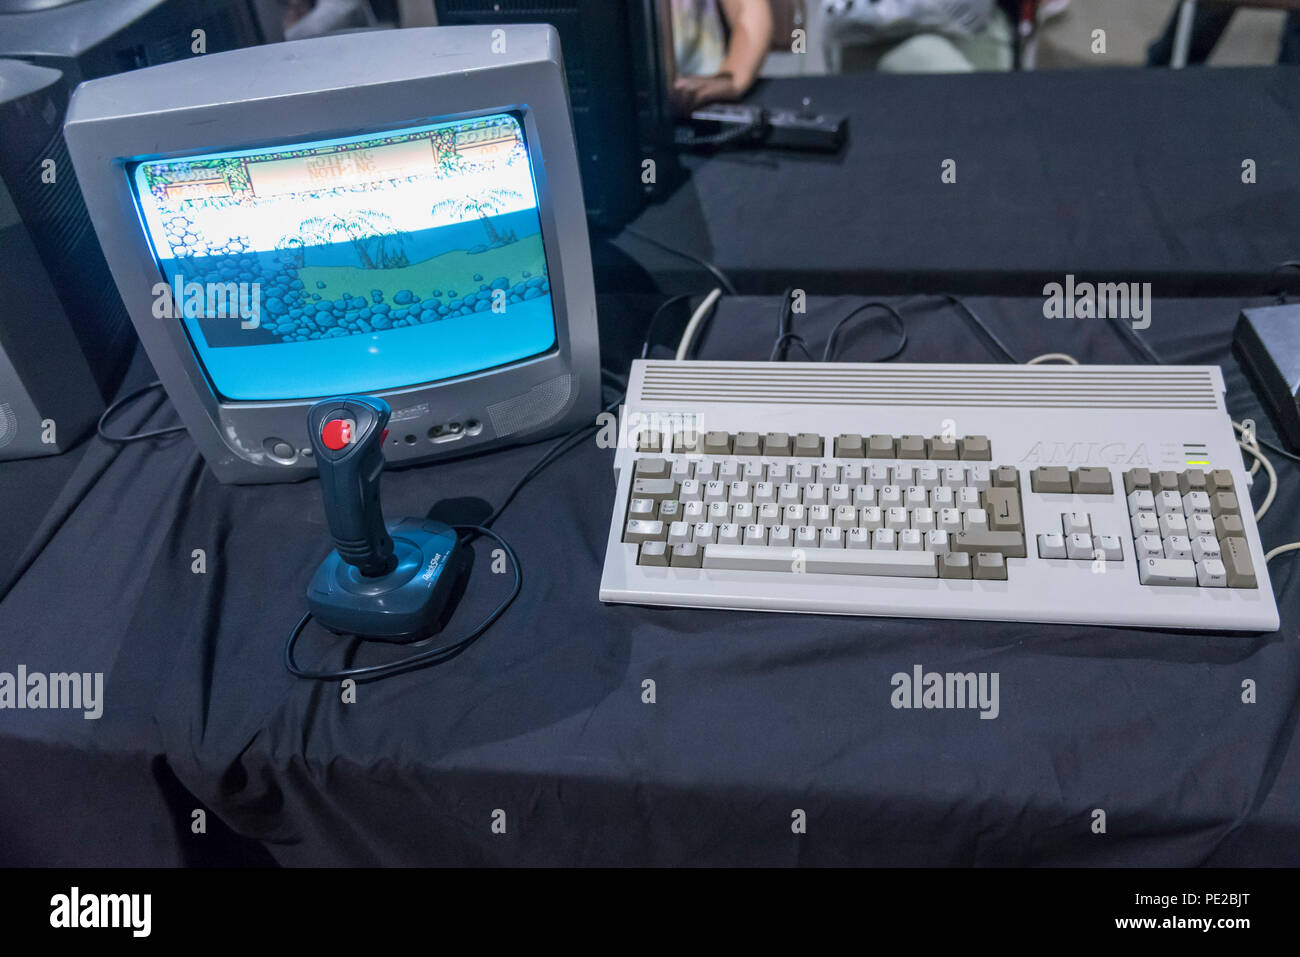 London, UK. 12 August 2018. A Commodore Amiga computer console at retro  games festival PLAY Expo held in London for the first time at Printworks,  Canada Water. Game enthusiasts visited to rediscover